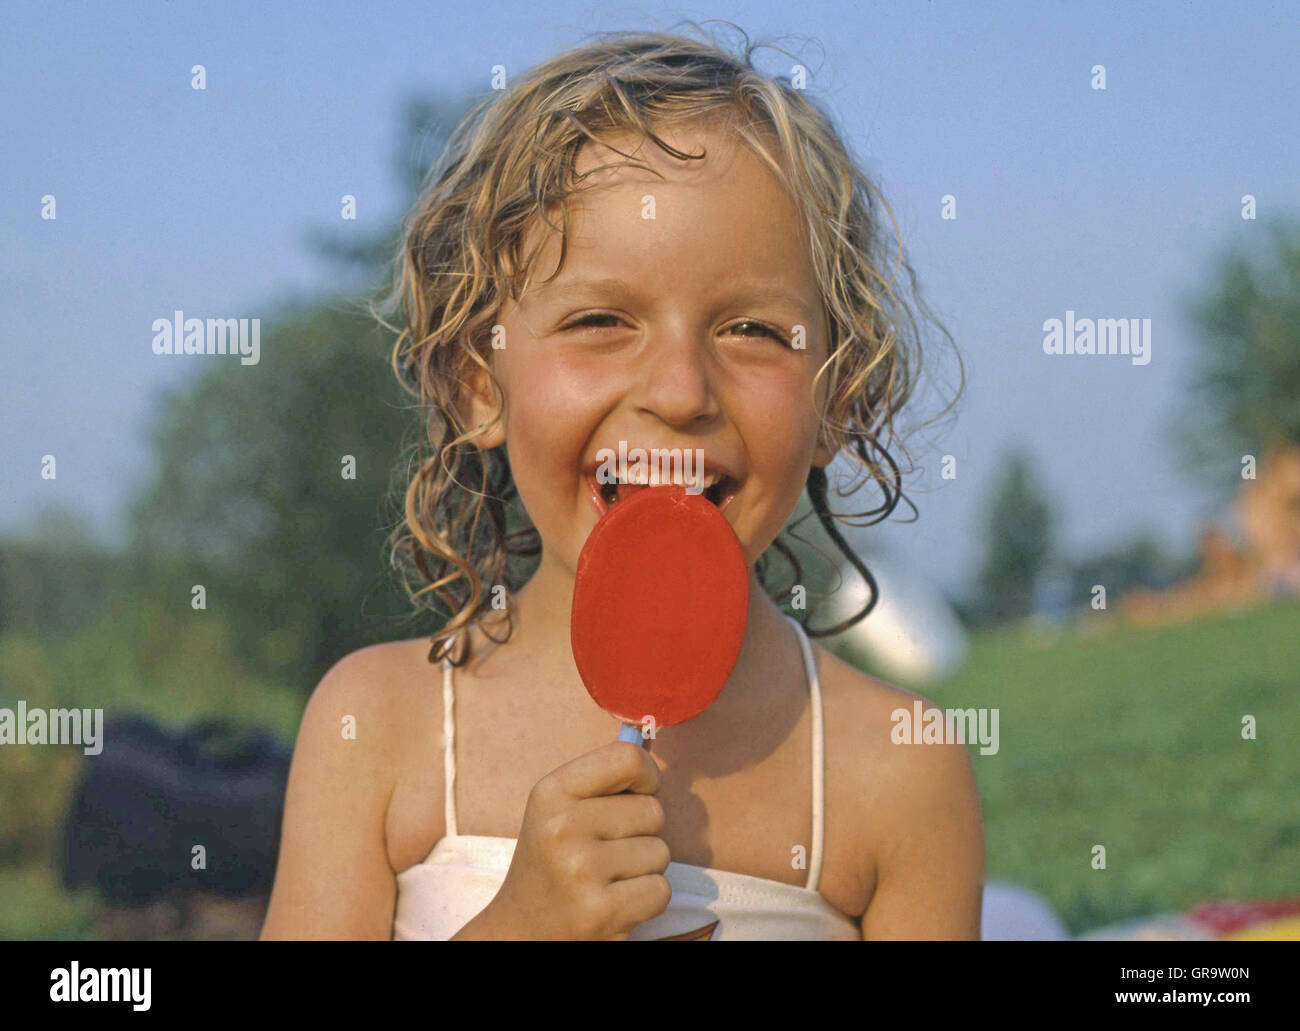 Little Girl Licking Ice Lolly Stock Photo